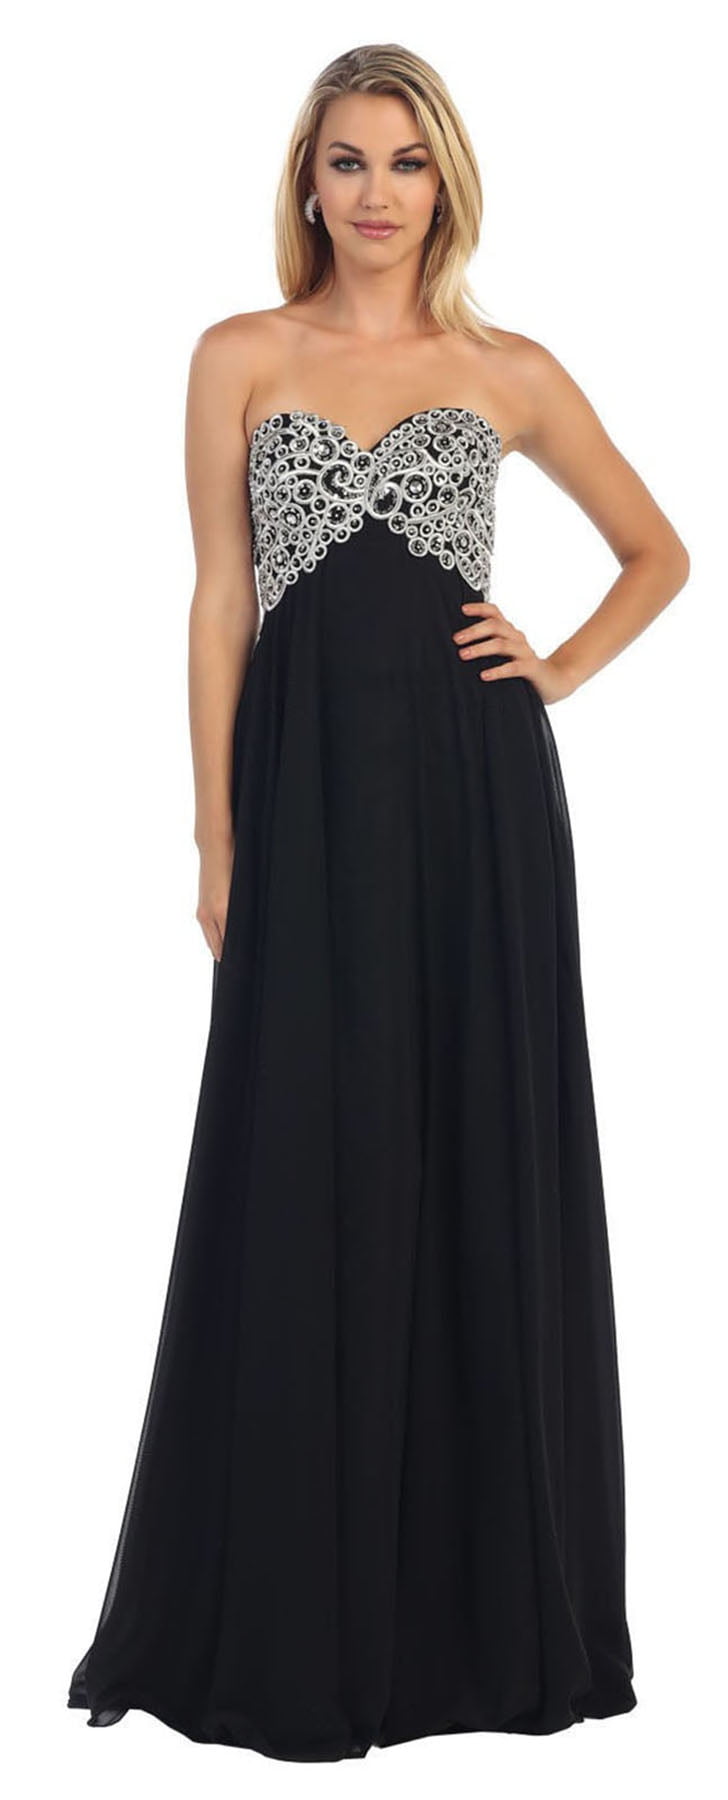 places to buy evening gowns near me